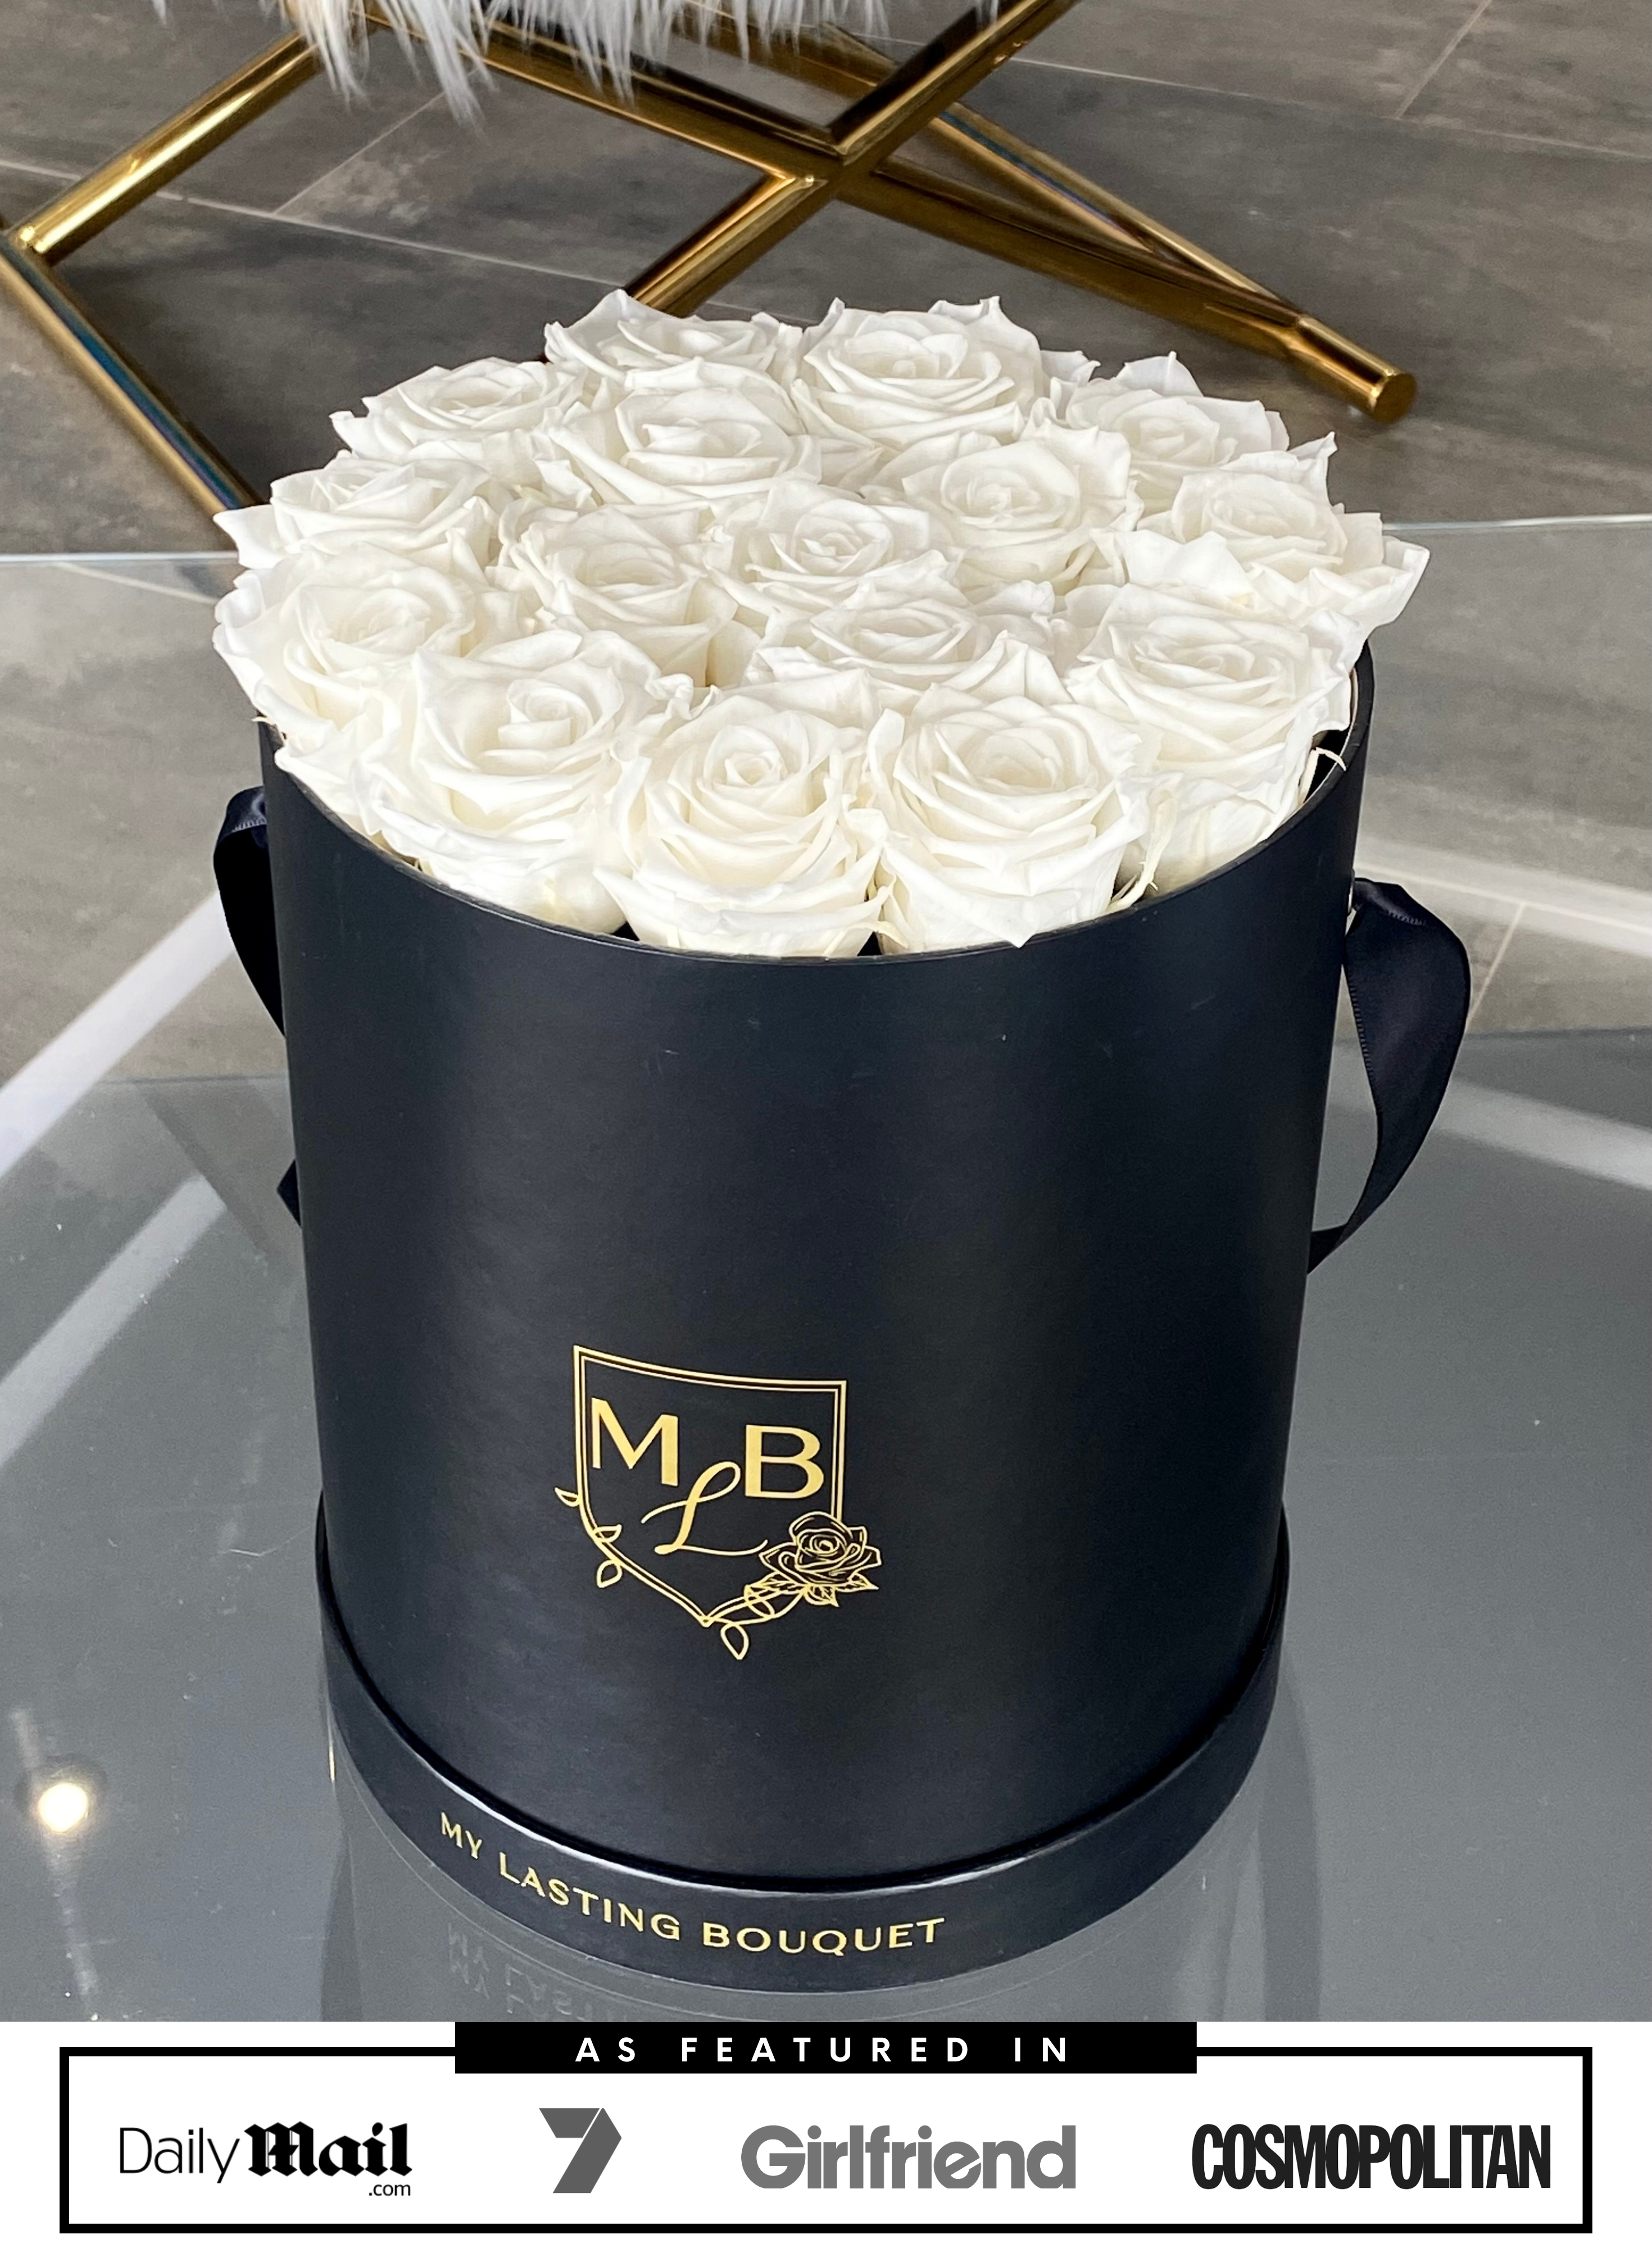 Round Rose Box- White Roses - My Lasting Bouquet